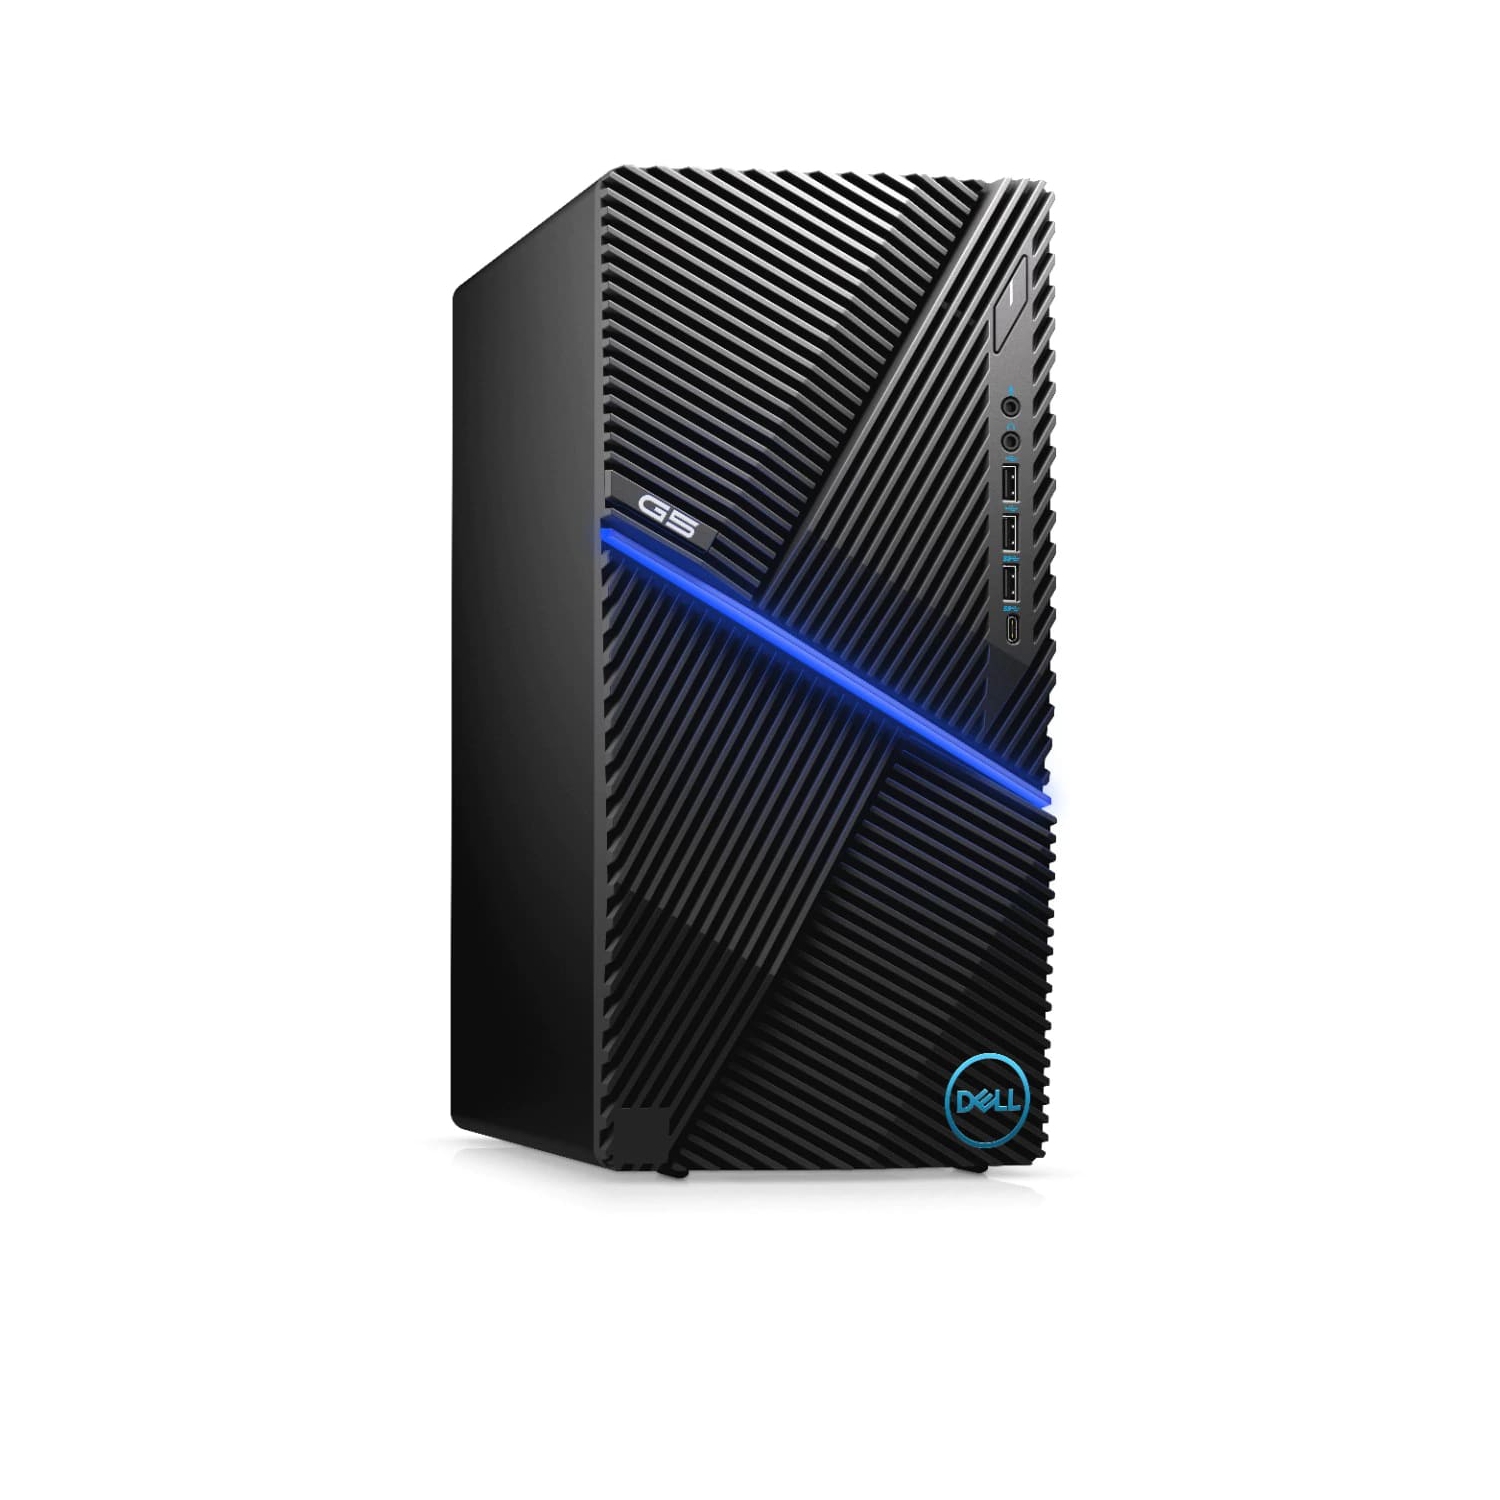 Refurbished (Excellent) - Dell G5 5000 Gaming Desktop (2020) | Core i7 - 1TB HDD - 8GB RAM - 2070 Super | 8 Cores @ 5.1 GHz - 10th Gen CPU Certified Refurbished